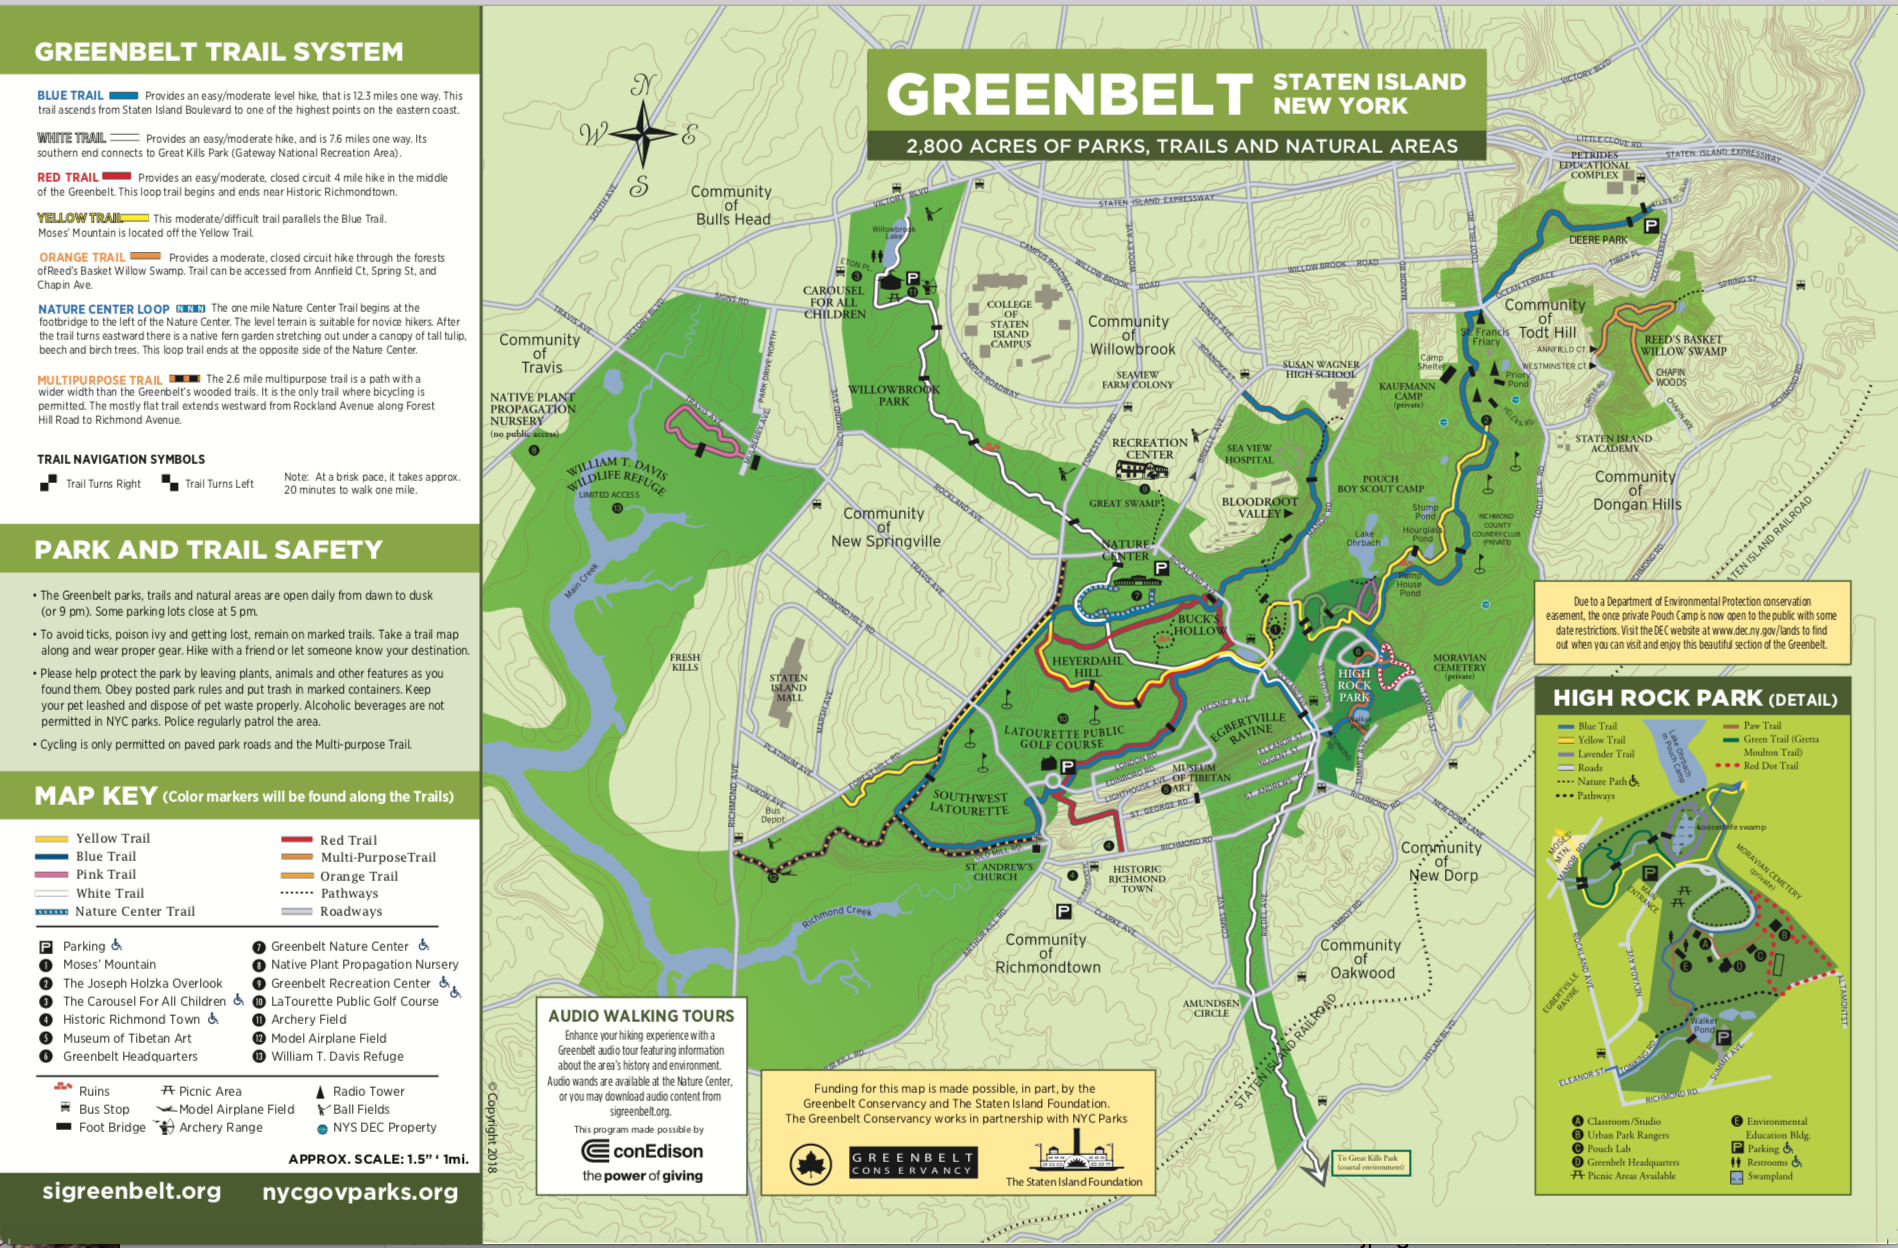 Staten Island Greenbelt Map Hiking and Running Trails are Open for Solitary Recreation. The 